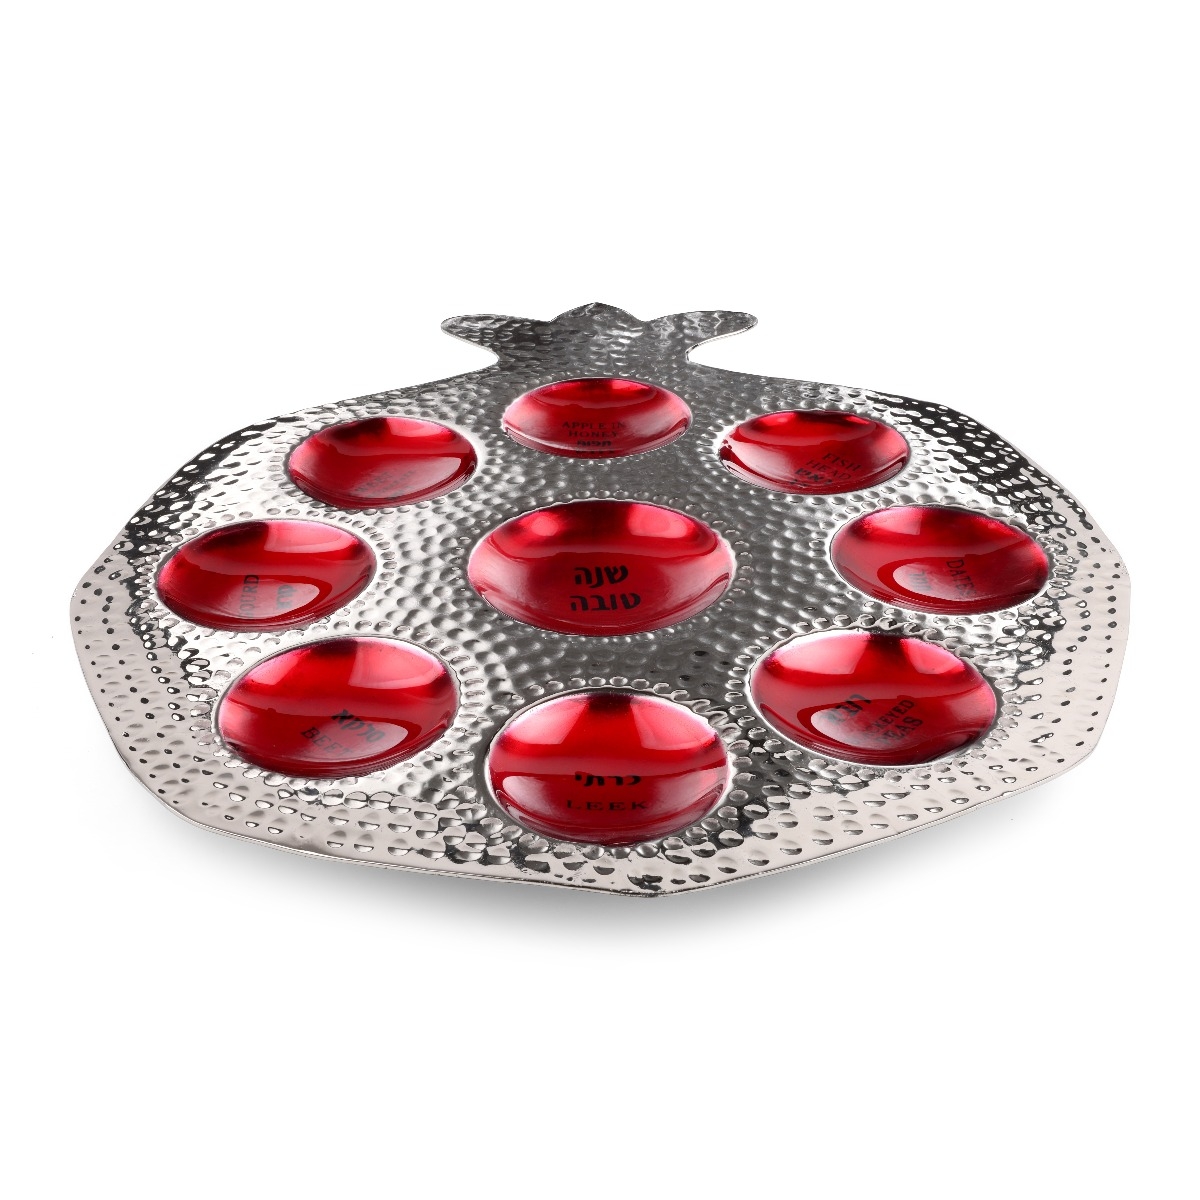 Hammered Pomegranate-Shaped Rosh Hashanah Simanim Plate with Red Enamel - 1